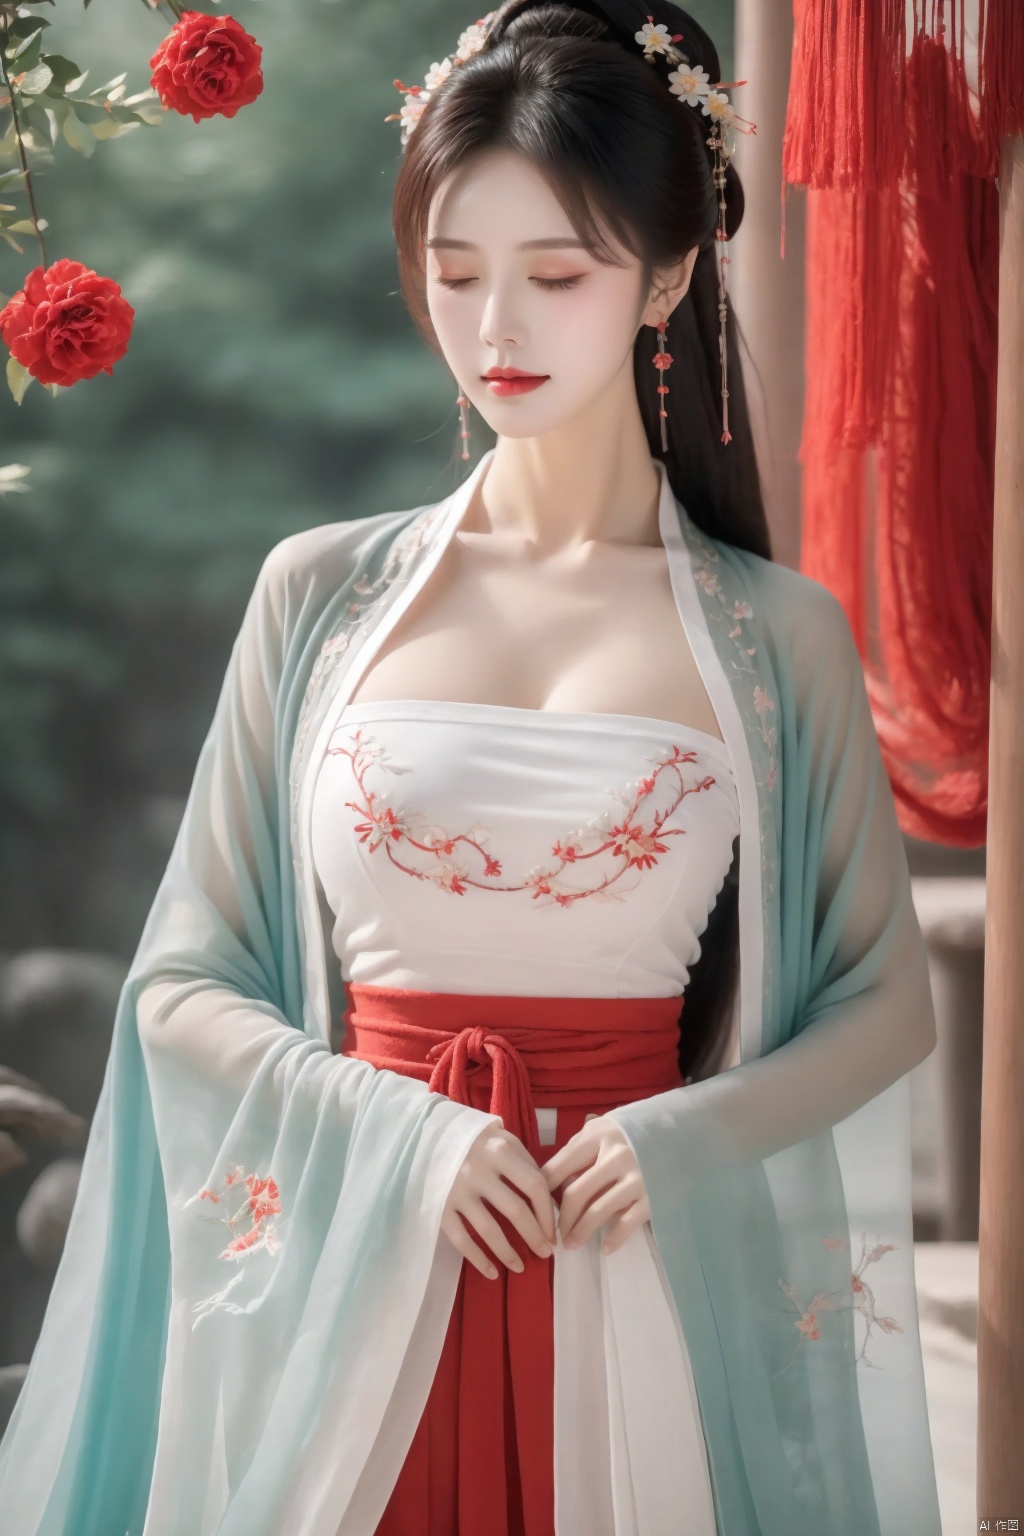  1 girls,Chinese ice crystal diamond earrings,be richly attired and heavily made-upEye shadow,blusher,Dress,chest,Plump breasts,Hanfu,(Clothing color: red),towel, veil, solo,forest_ background, closed_eyes,low-cut,transparent,A gauze fan with embroider flowers.